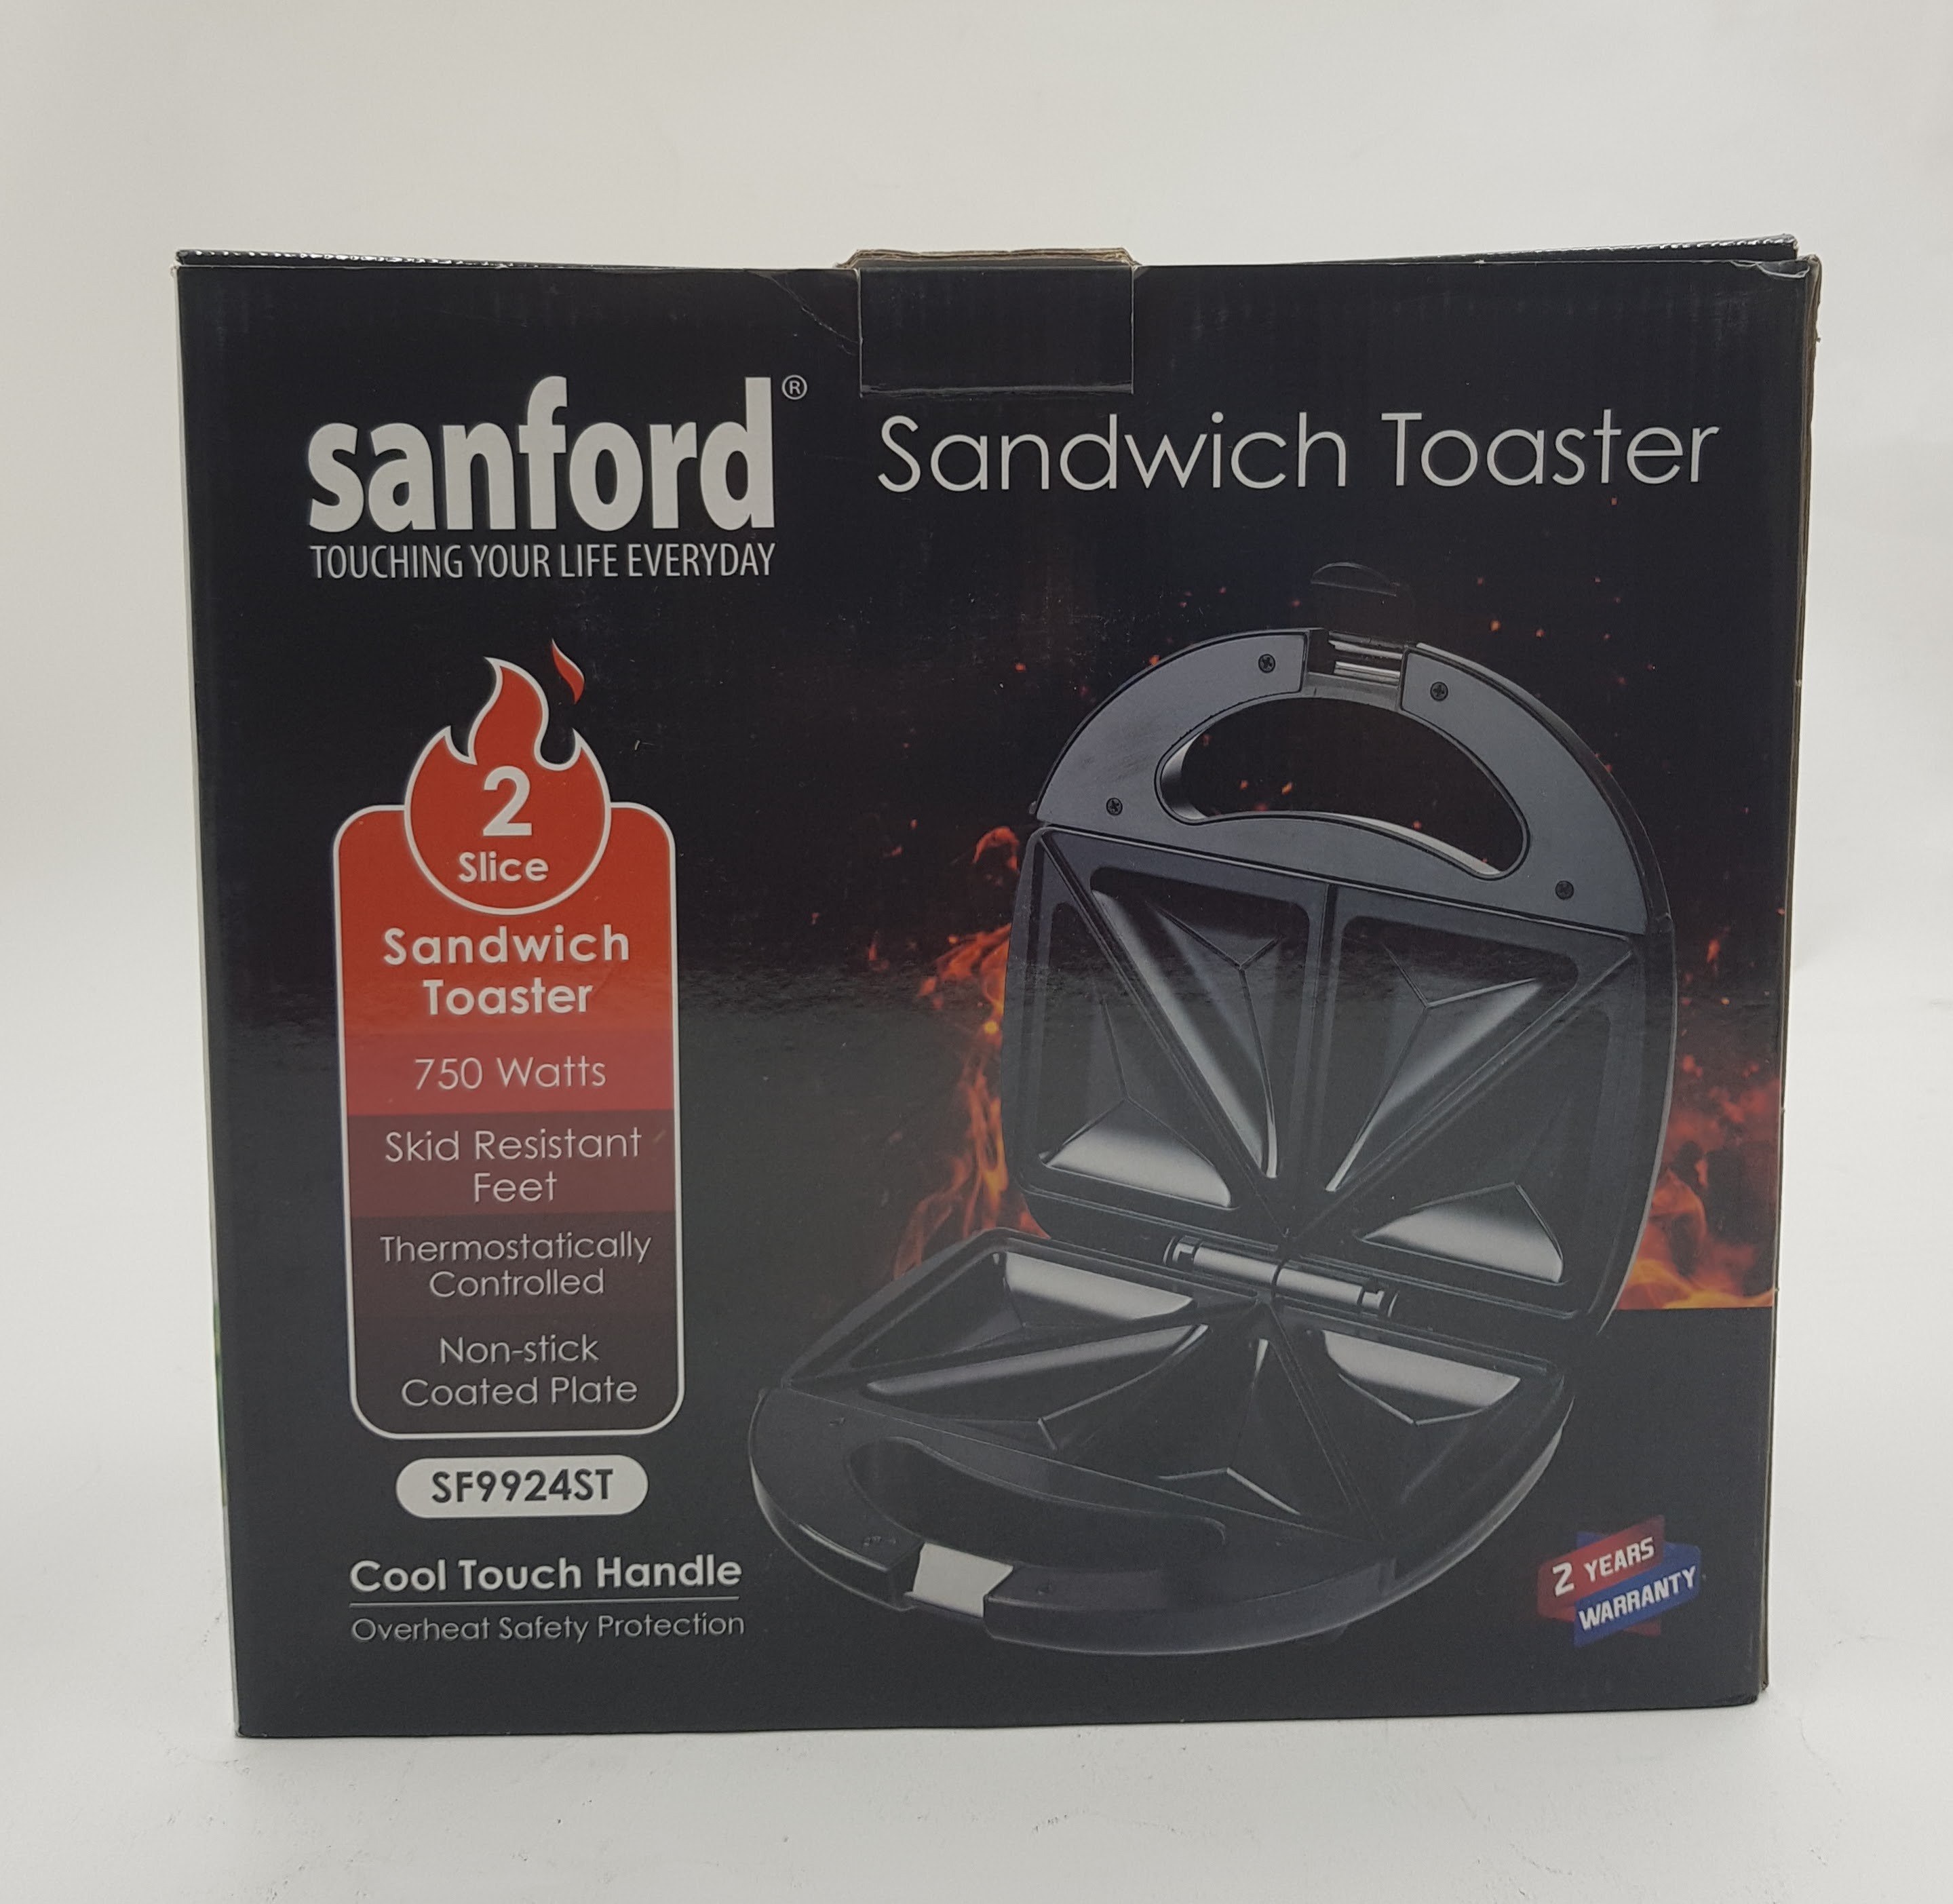 Sanford Touching Your Life Everyday Sandwich Toaster 750 watts